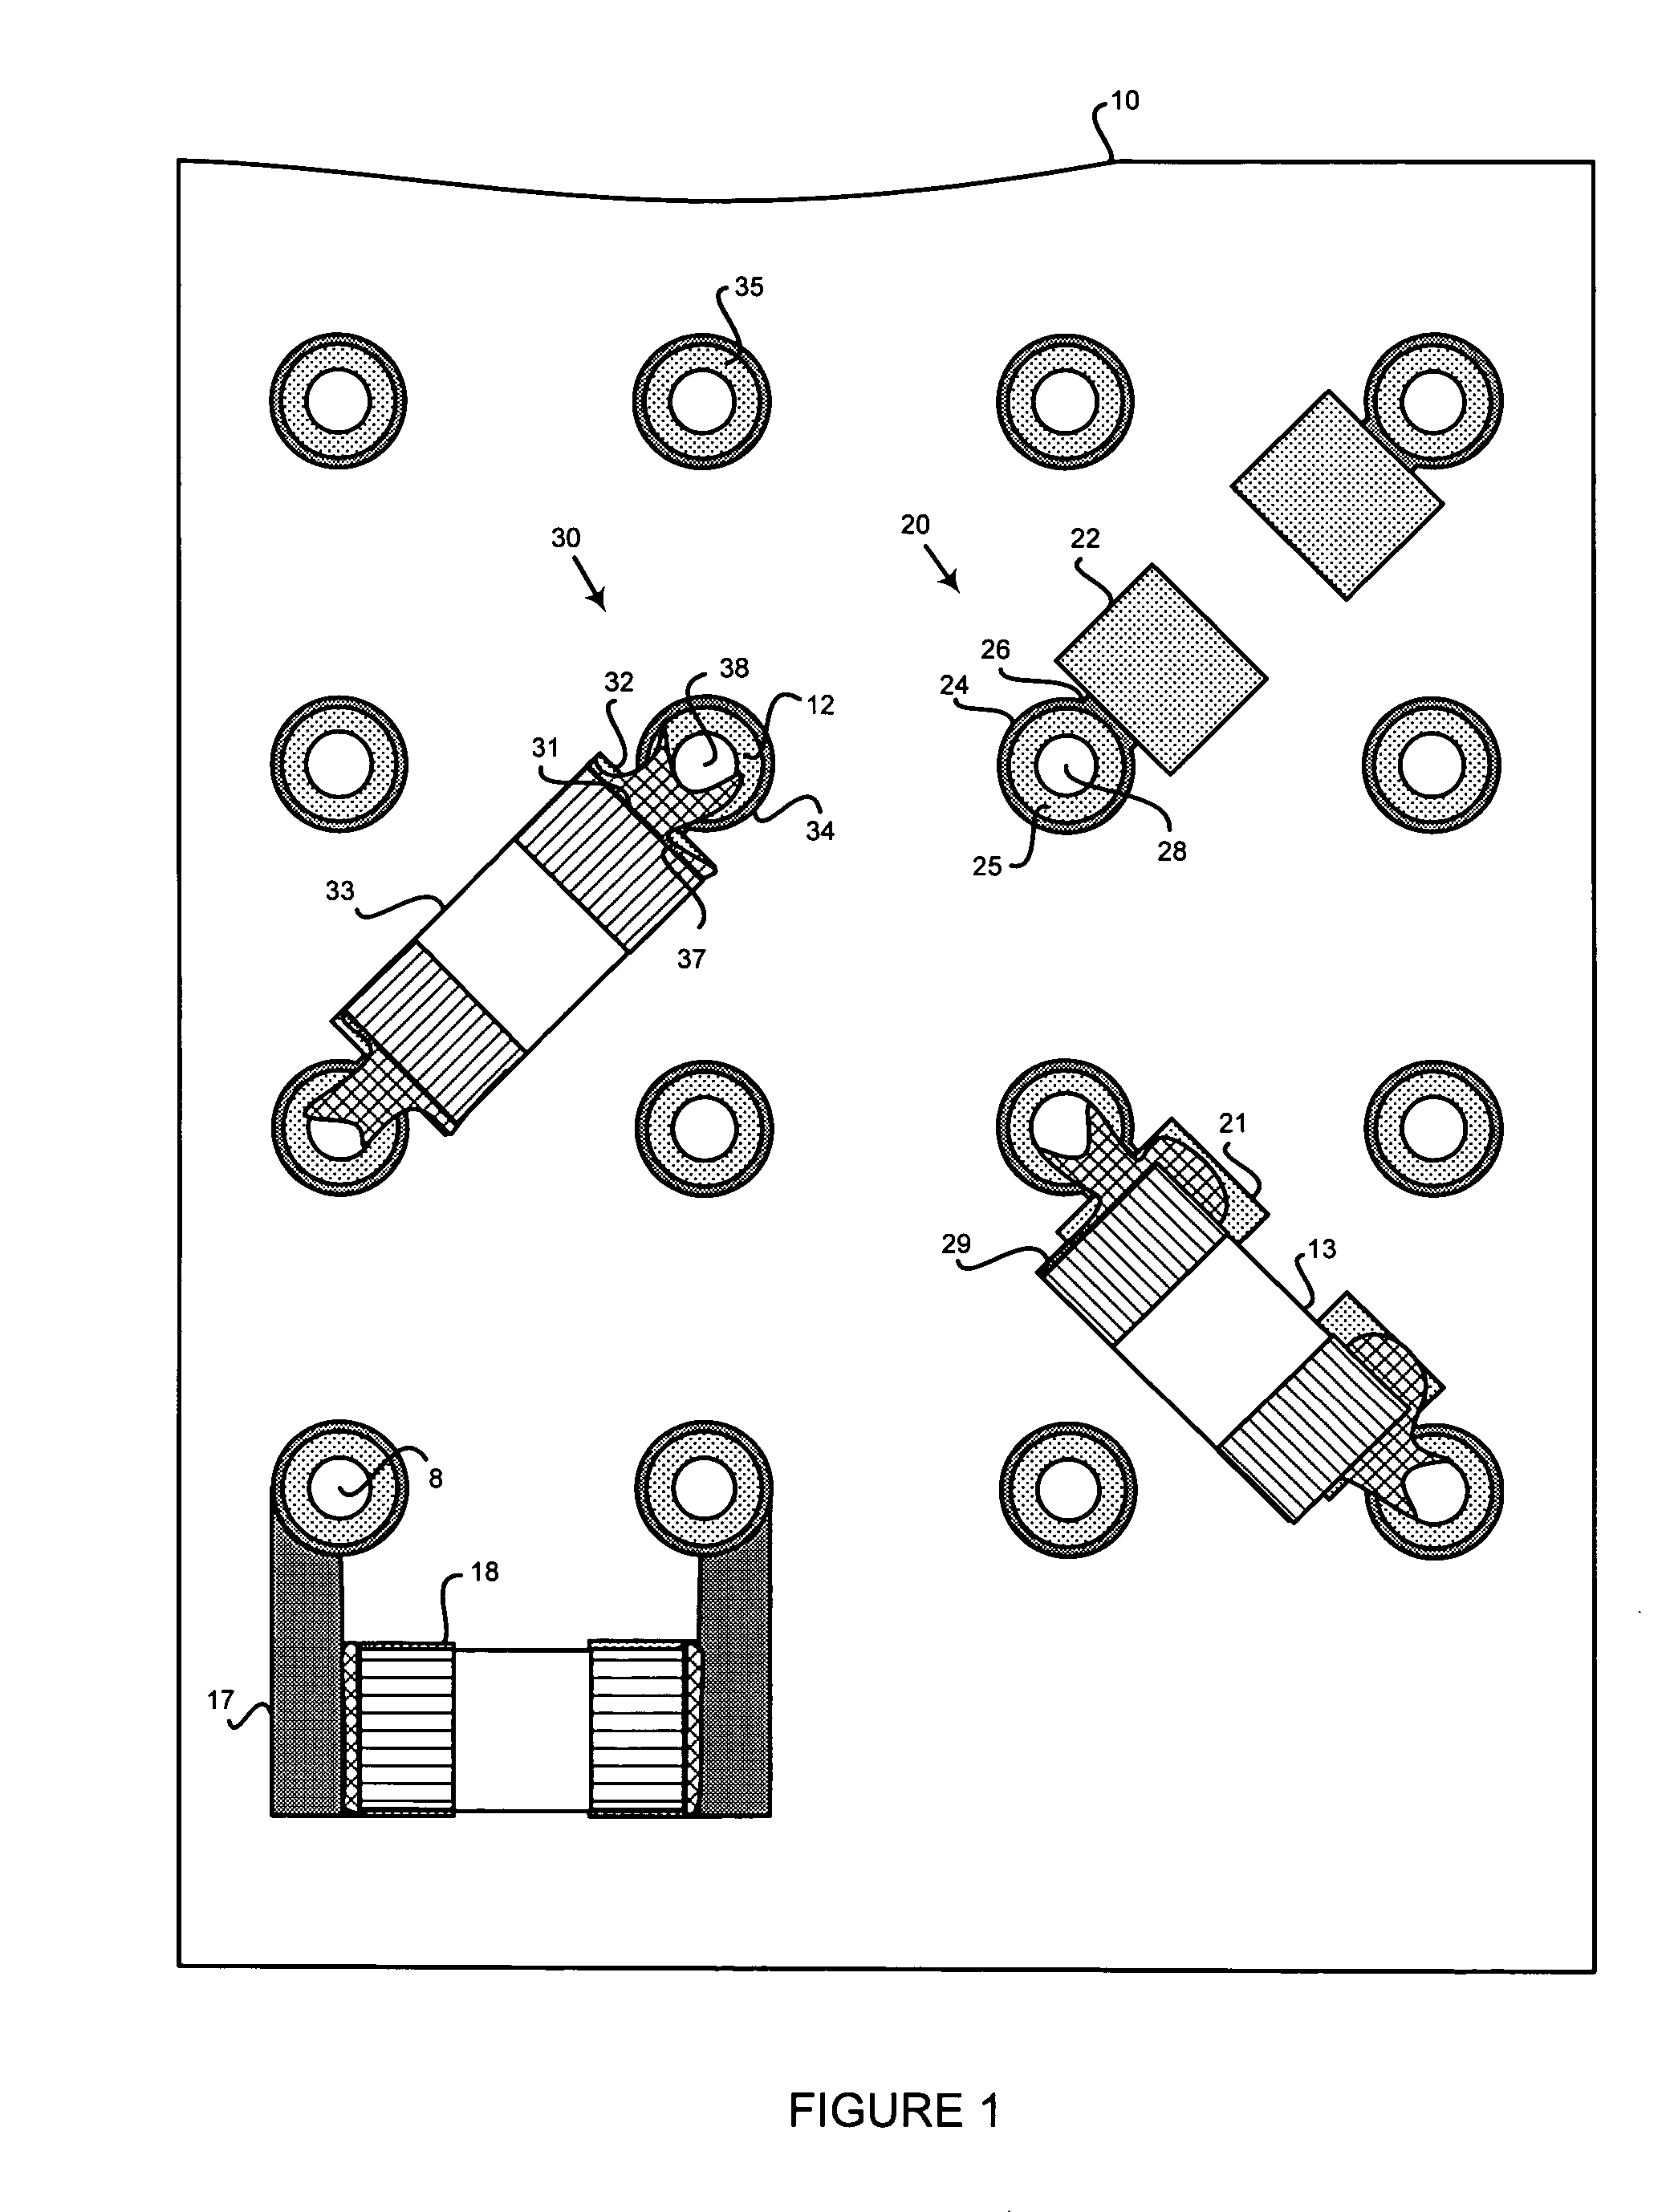 Substrate with via and pad structures